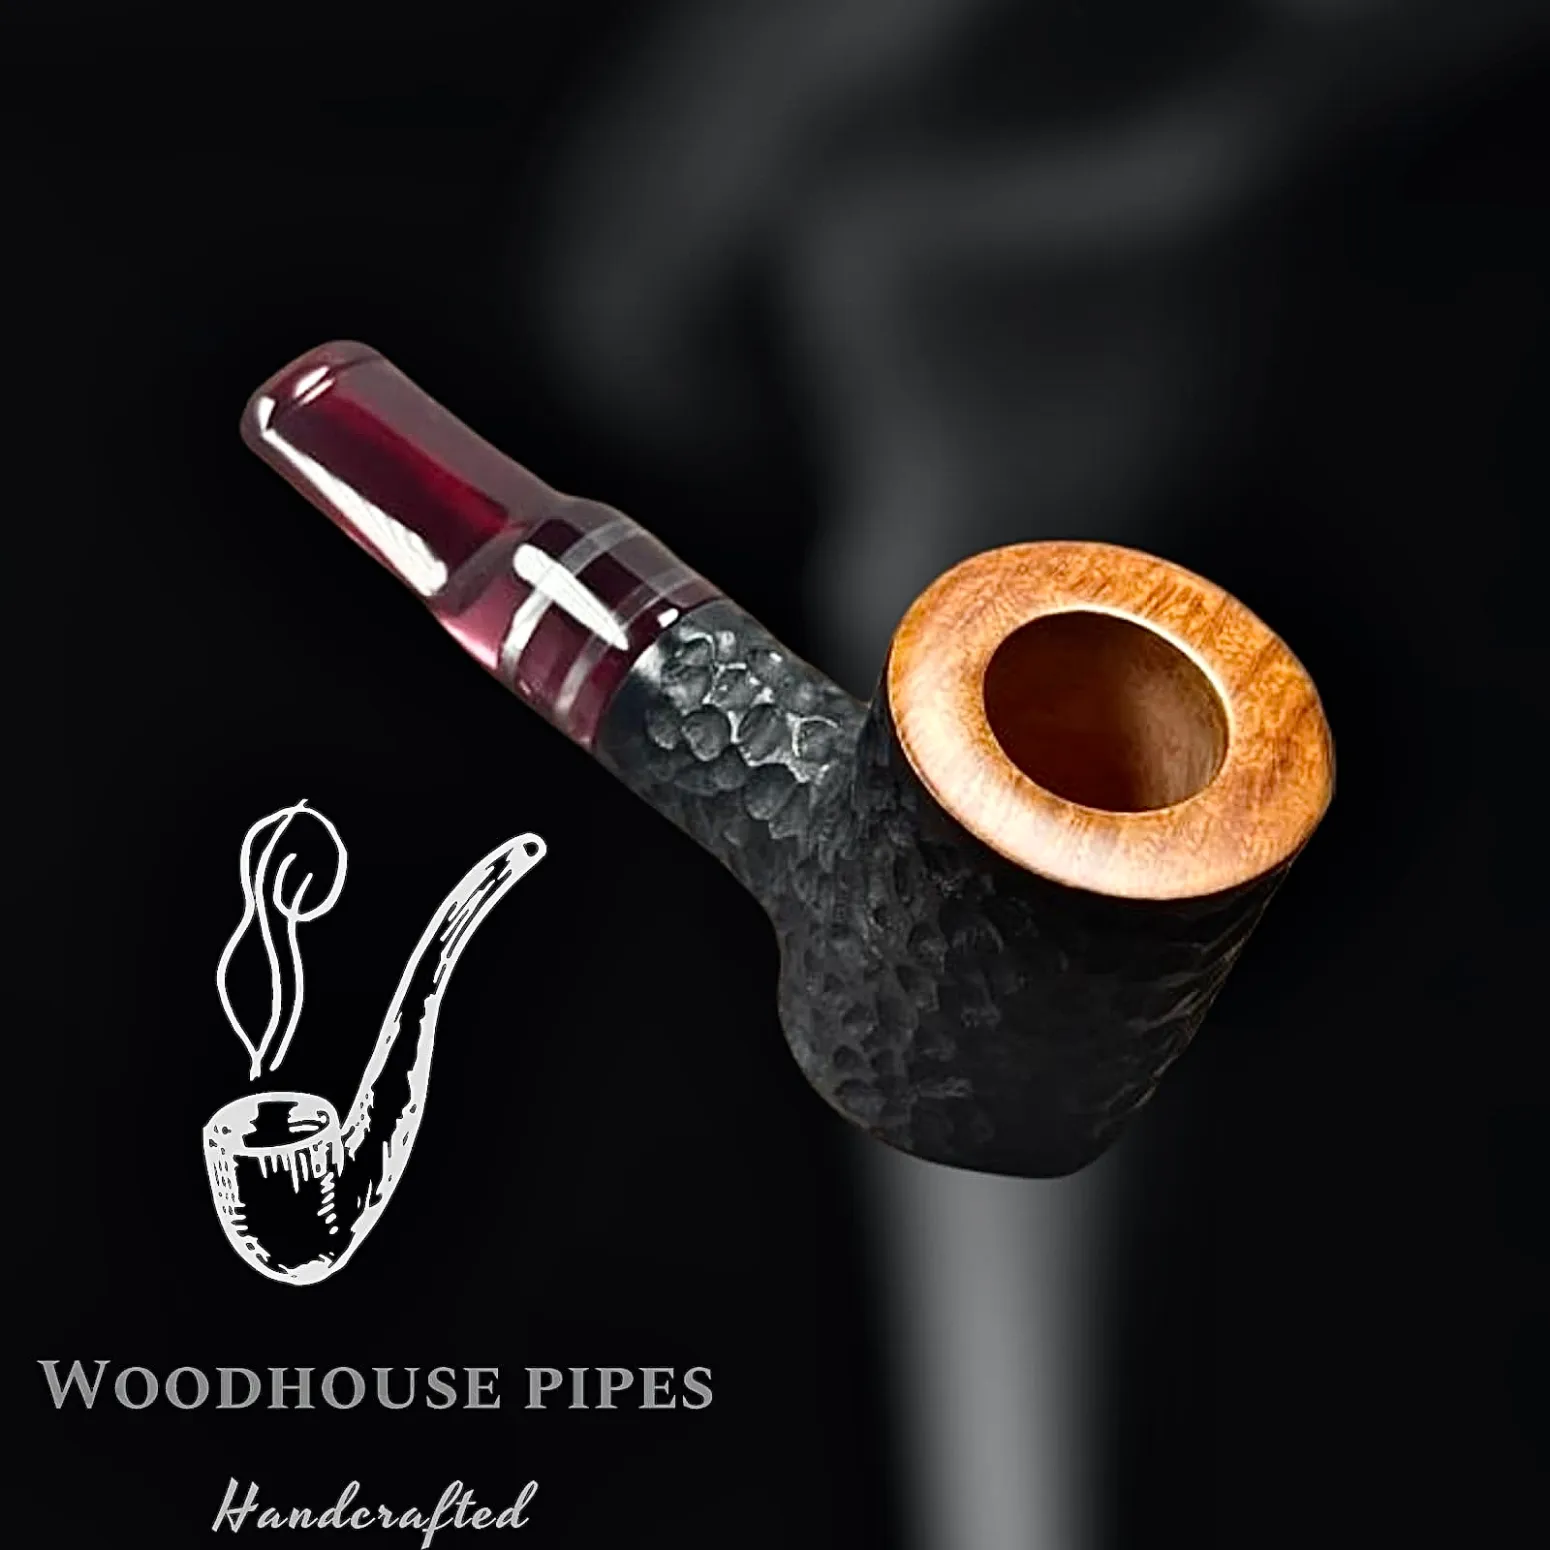 Handmade Tobacco Pipe - WOODHOUSE PIPES Handcrafted - Photo Number 0132